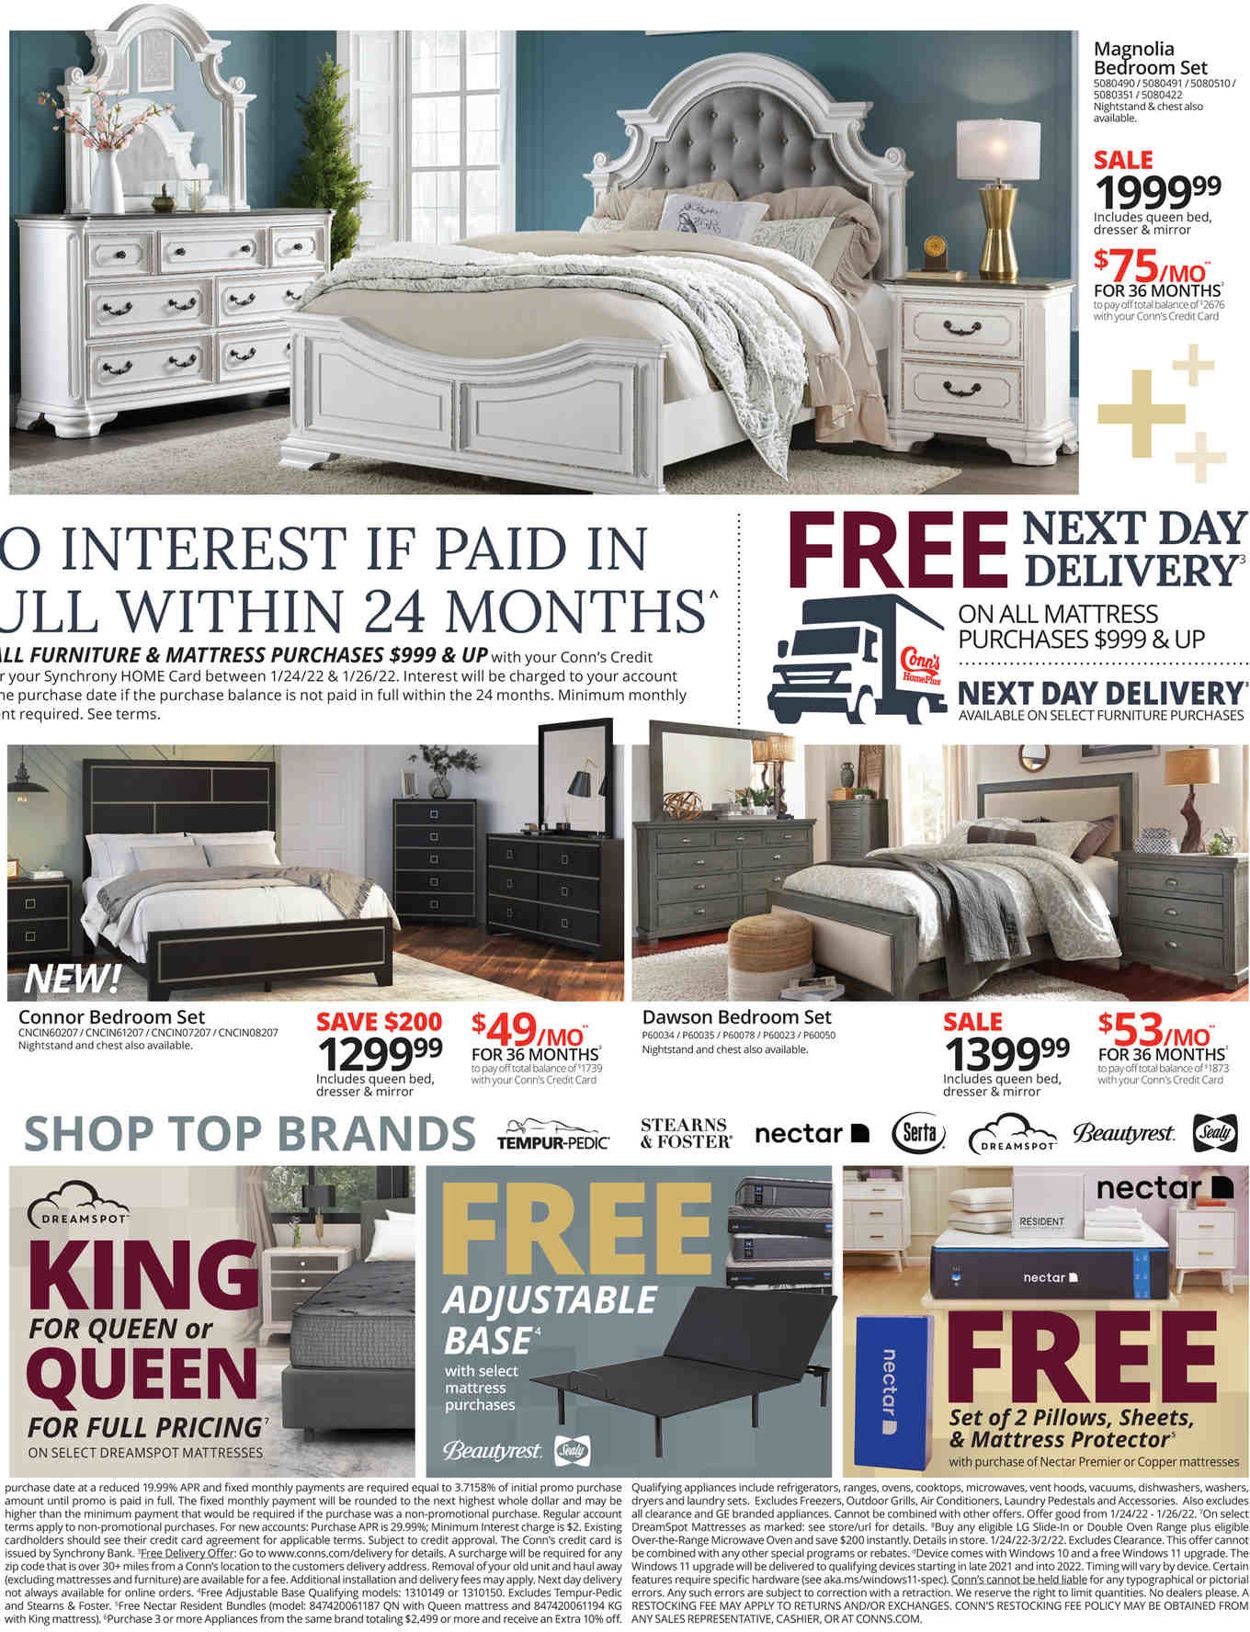 Conn's Home Plus Ad from 01/24/2022